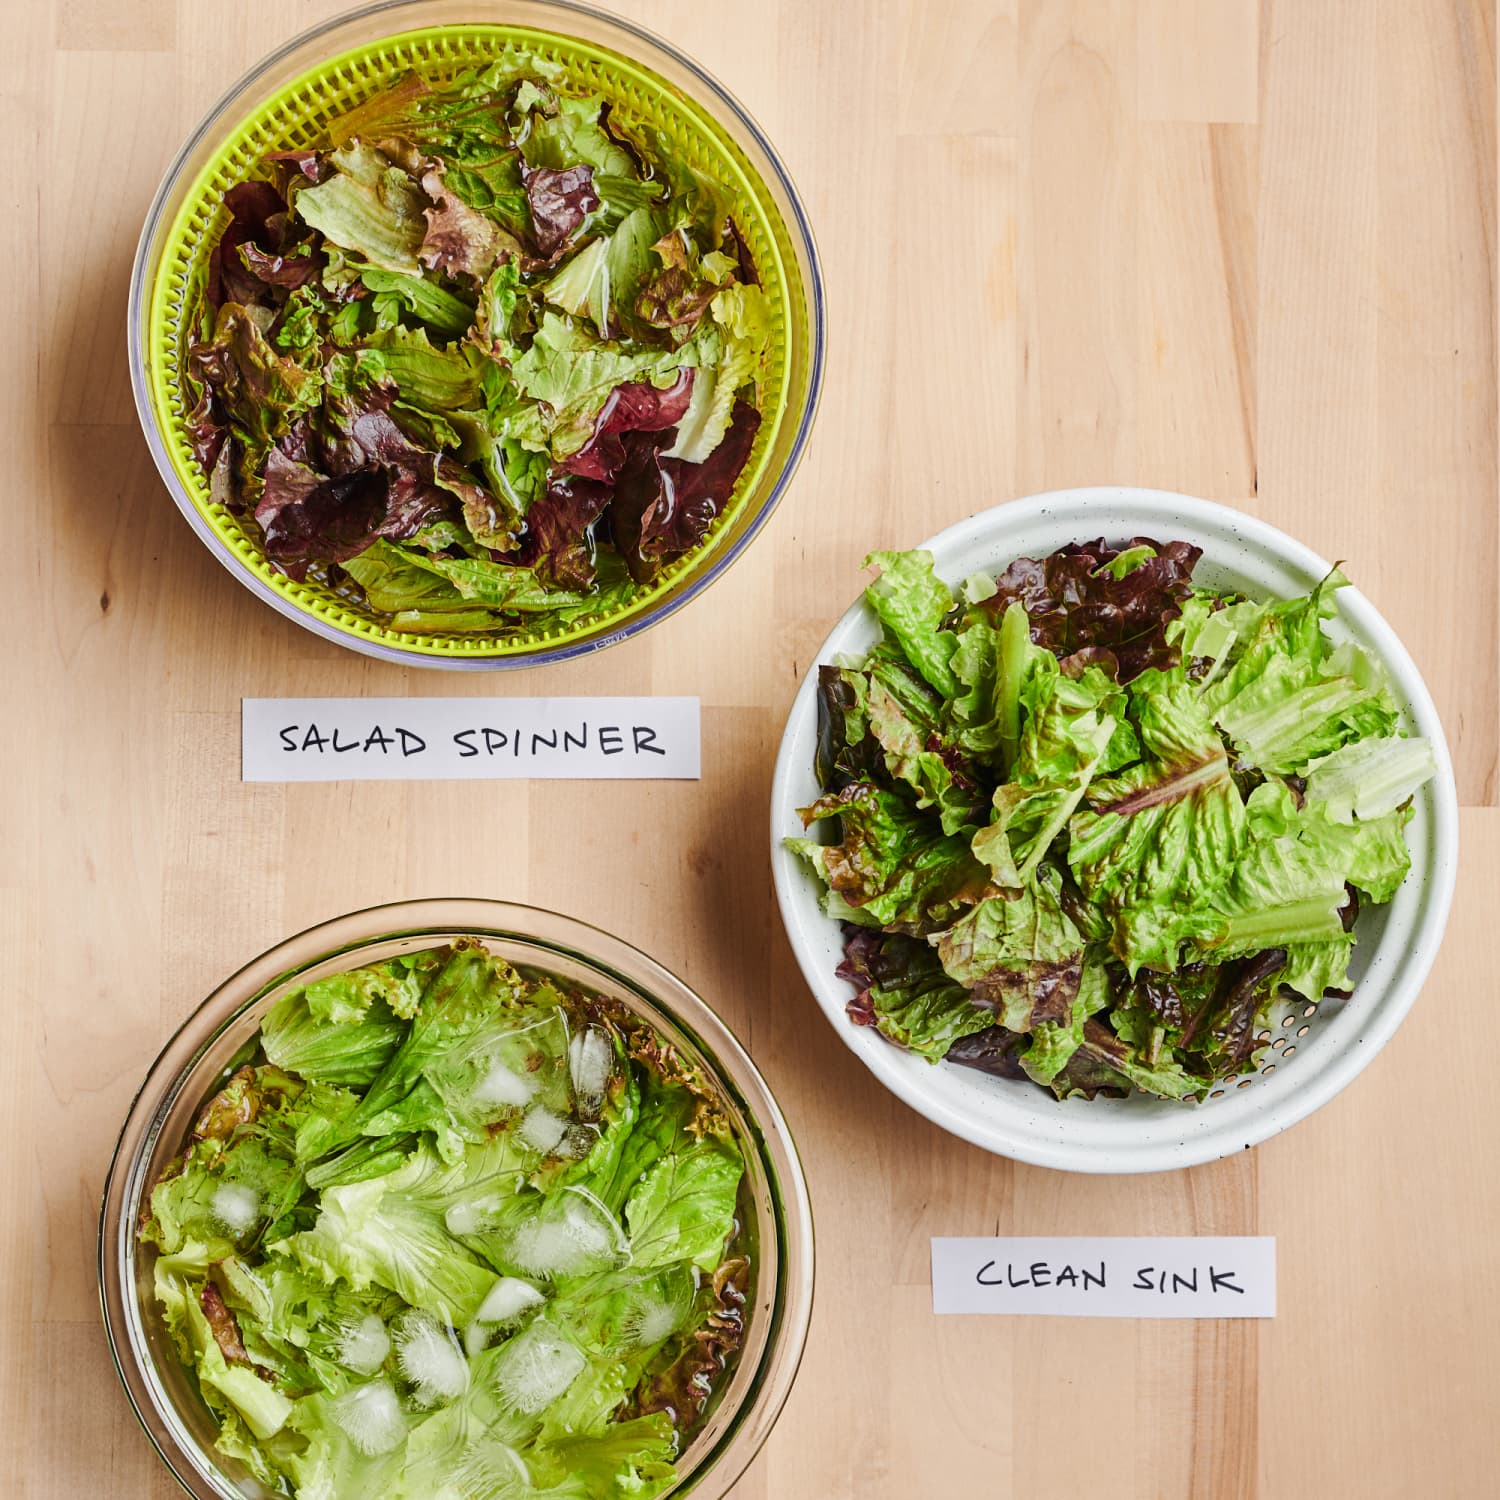 9 Tips to Avoid Illness From Salad Greens